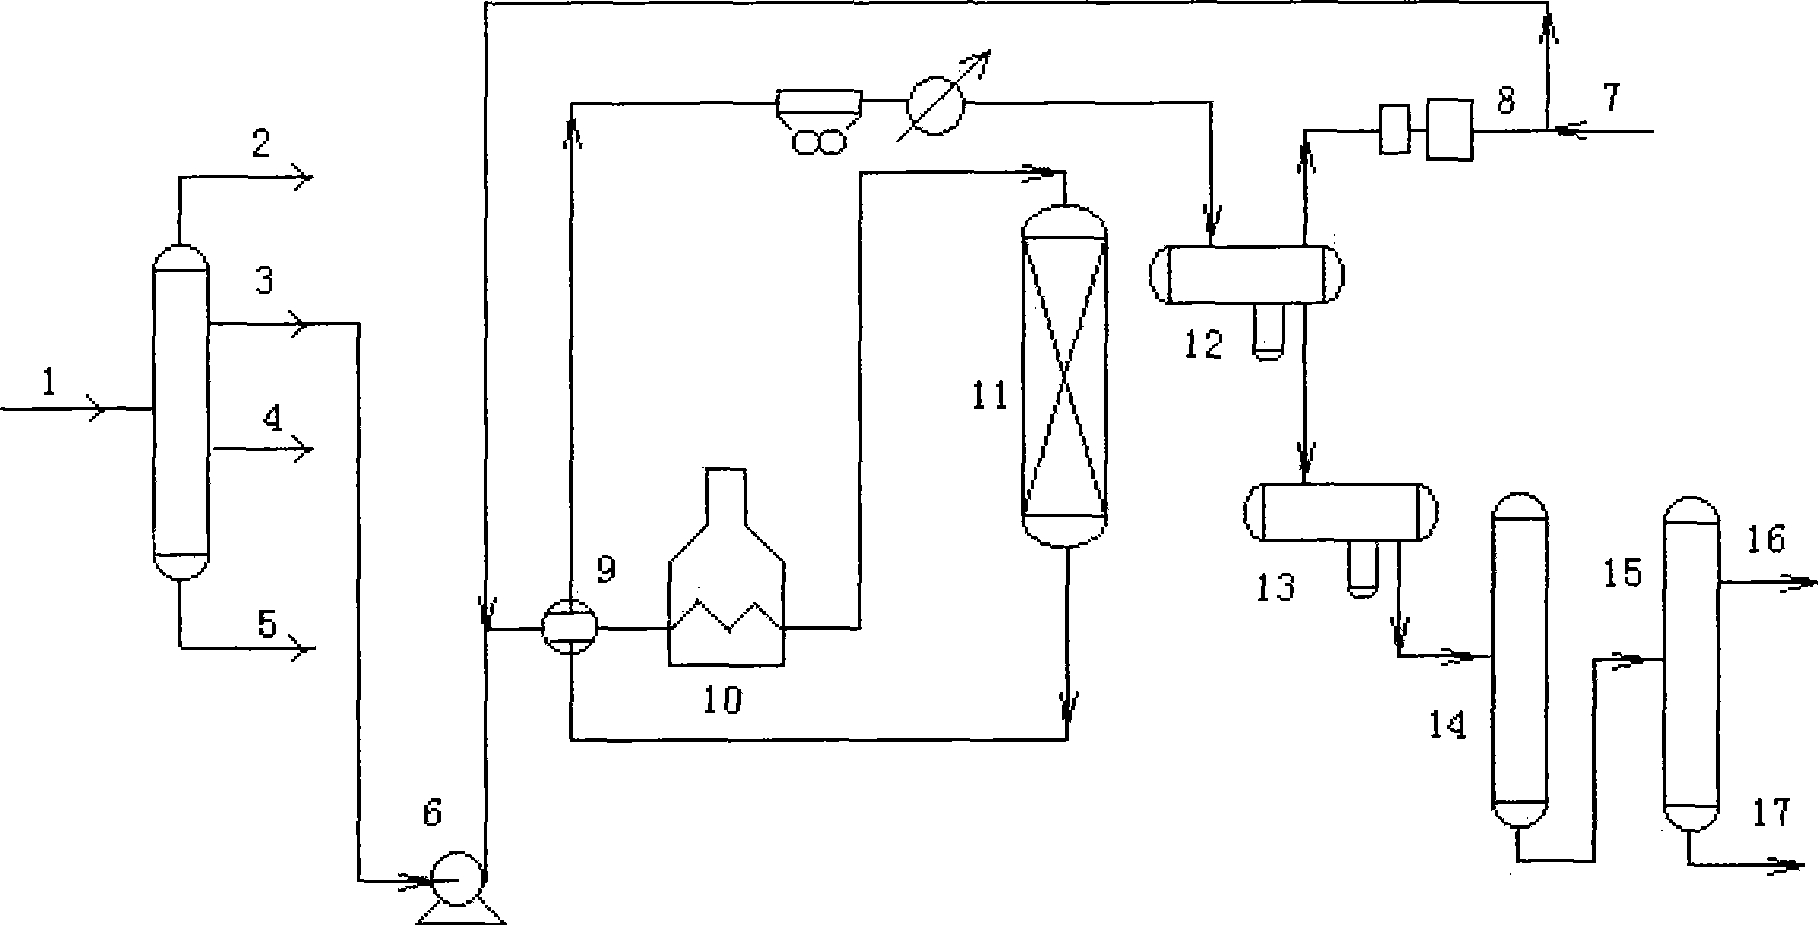 Mixed hydrogenation process for coker gasoline and coking kerosene